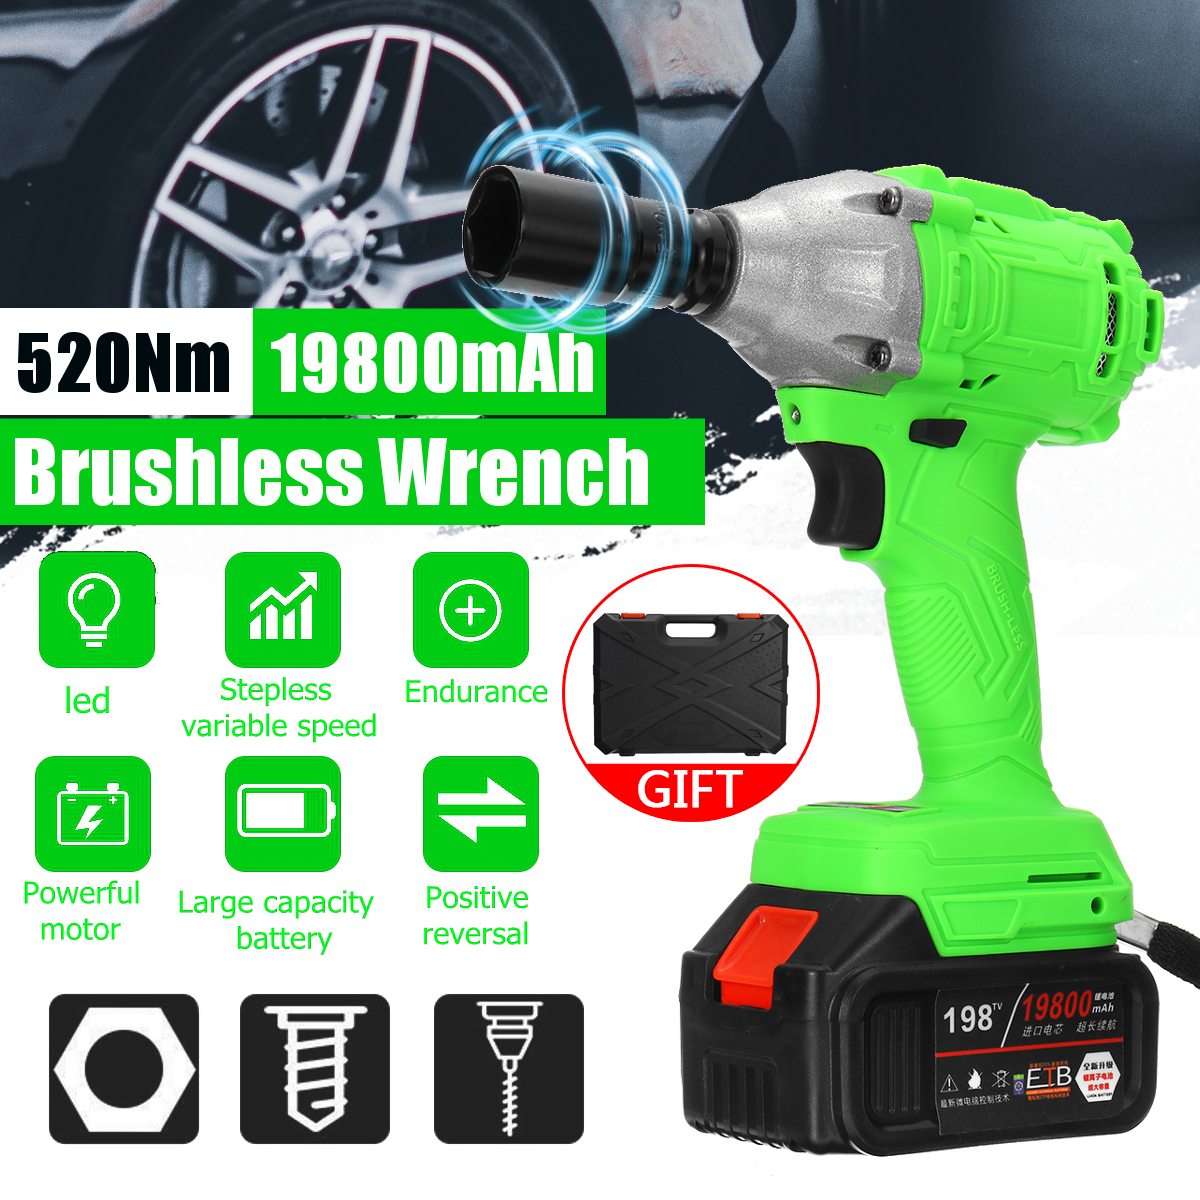 12-520Nm-19800mAh-Electric-Cordless-Impact-Wrench-Brushless-Battery--Case-1676852-1